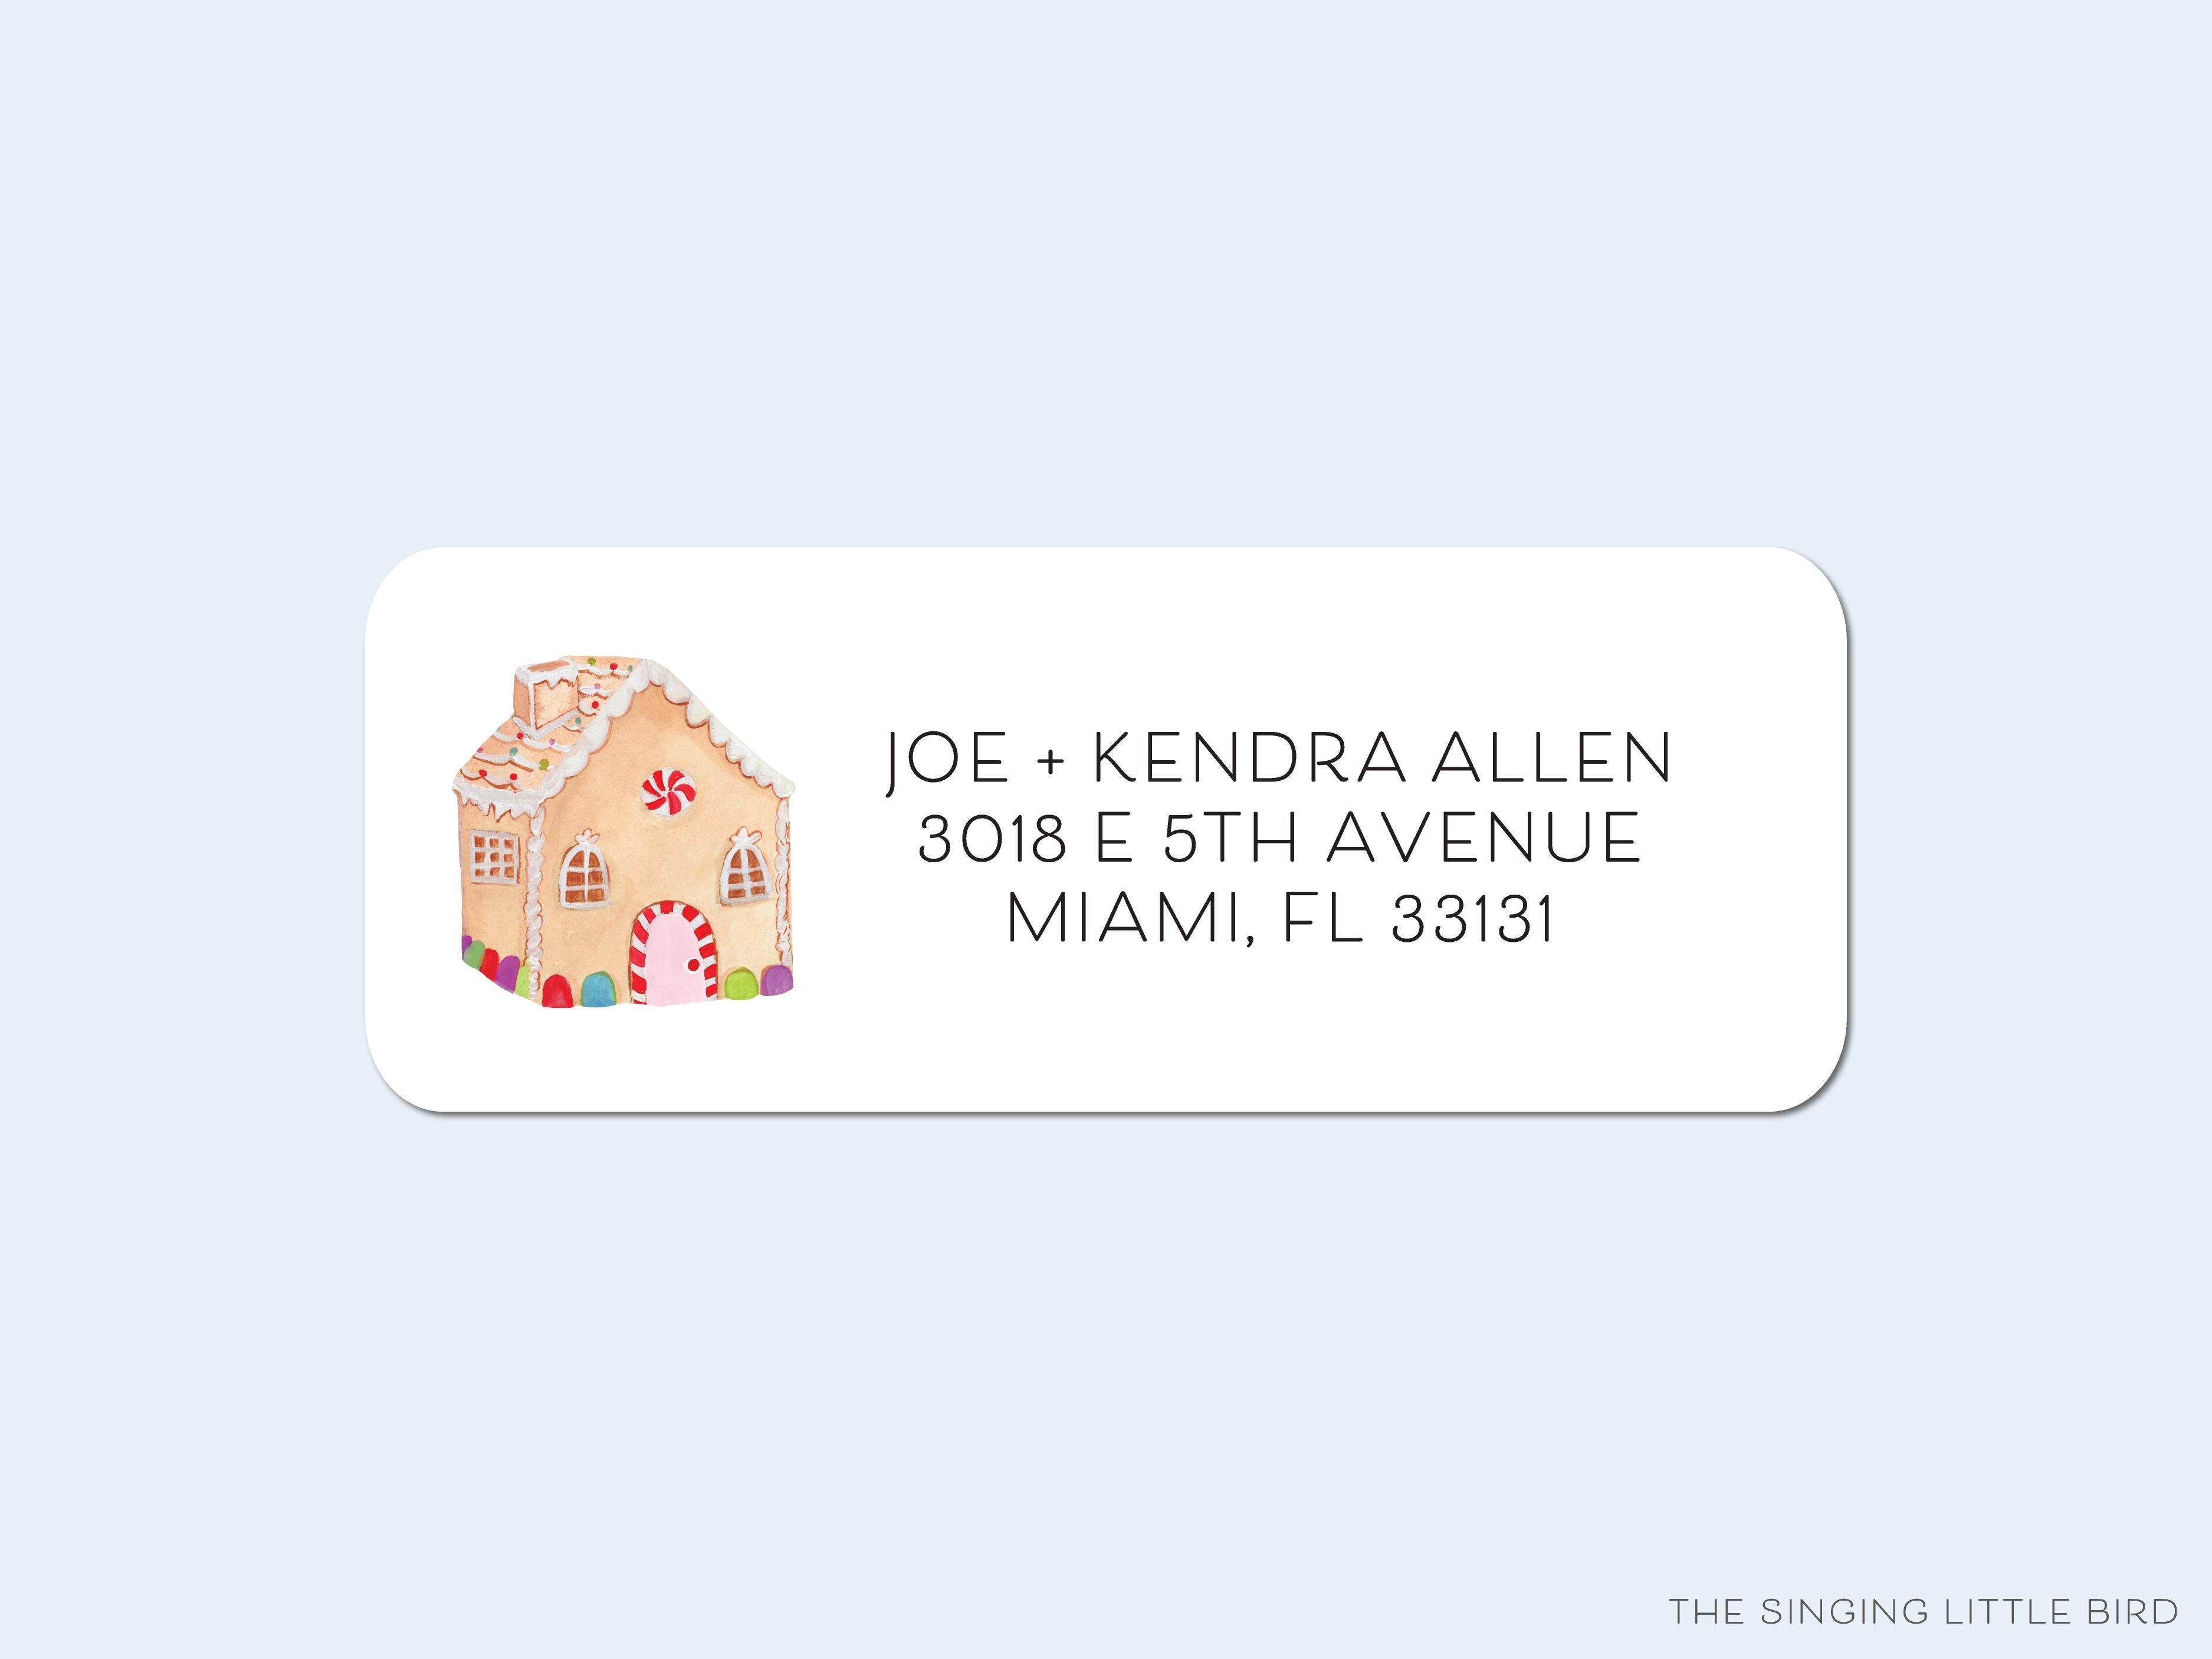 Gingerbread House Return Address Labels-These personalized return address labels are 2.625" x 1" and feature our hand-painted watercolor Gingerbread House, printed in the USA on beautiful matte finish labels. These make great gifts for yourself or the Christmas lover.-The Singing Little Bird